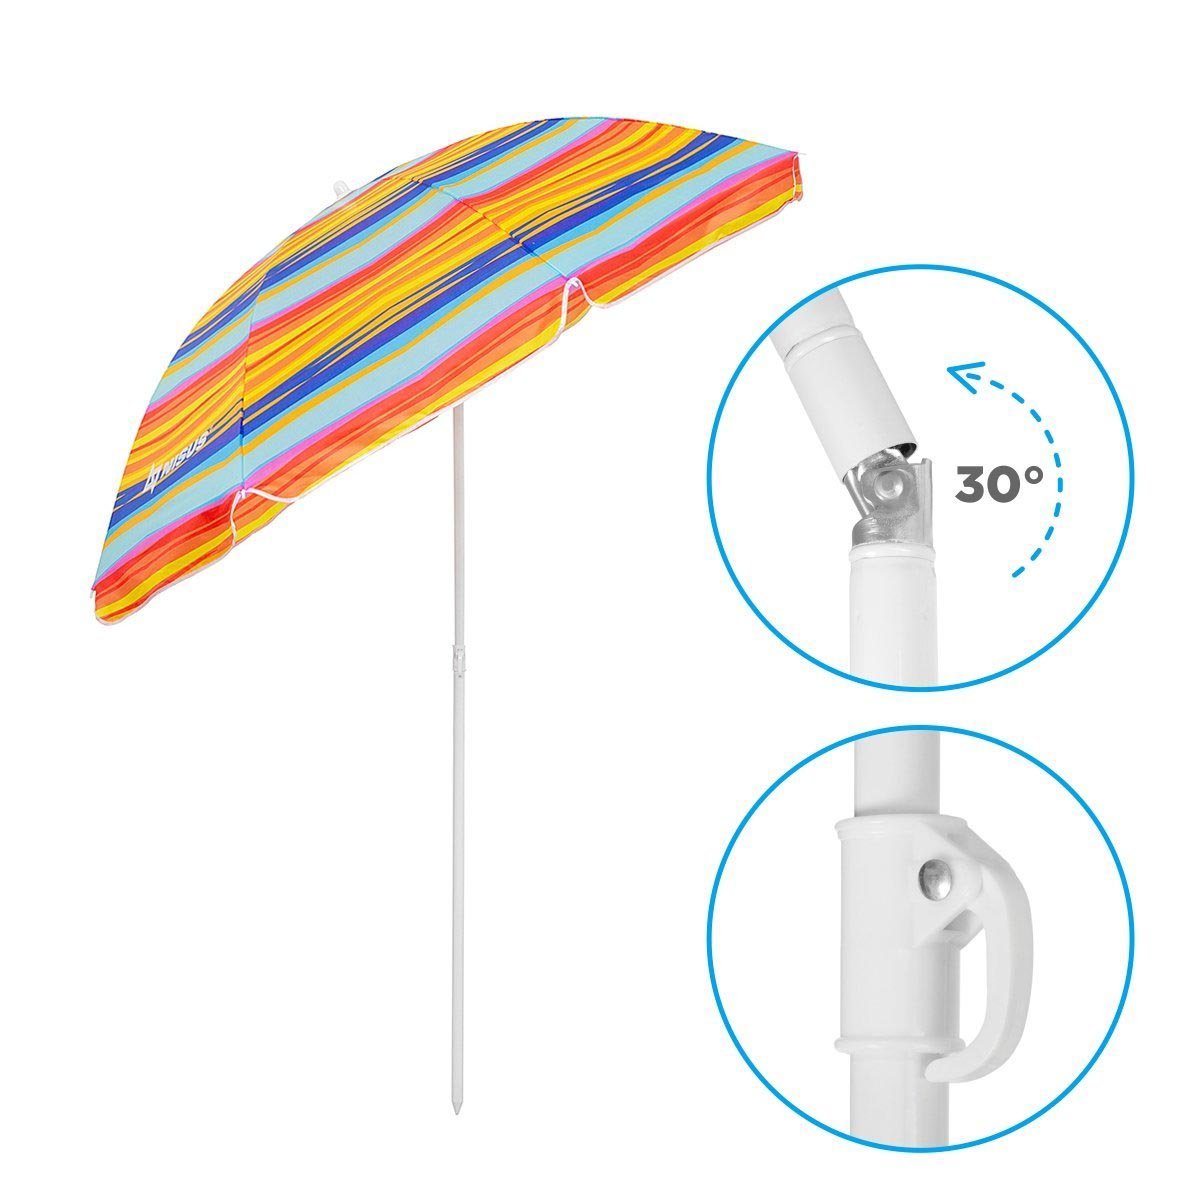 4, 5 ft Bright Tilting Beach Umbrella with Carry Bag featuring a 30 inclination degree